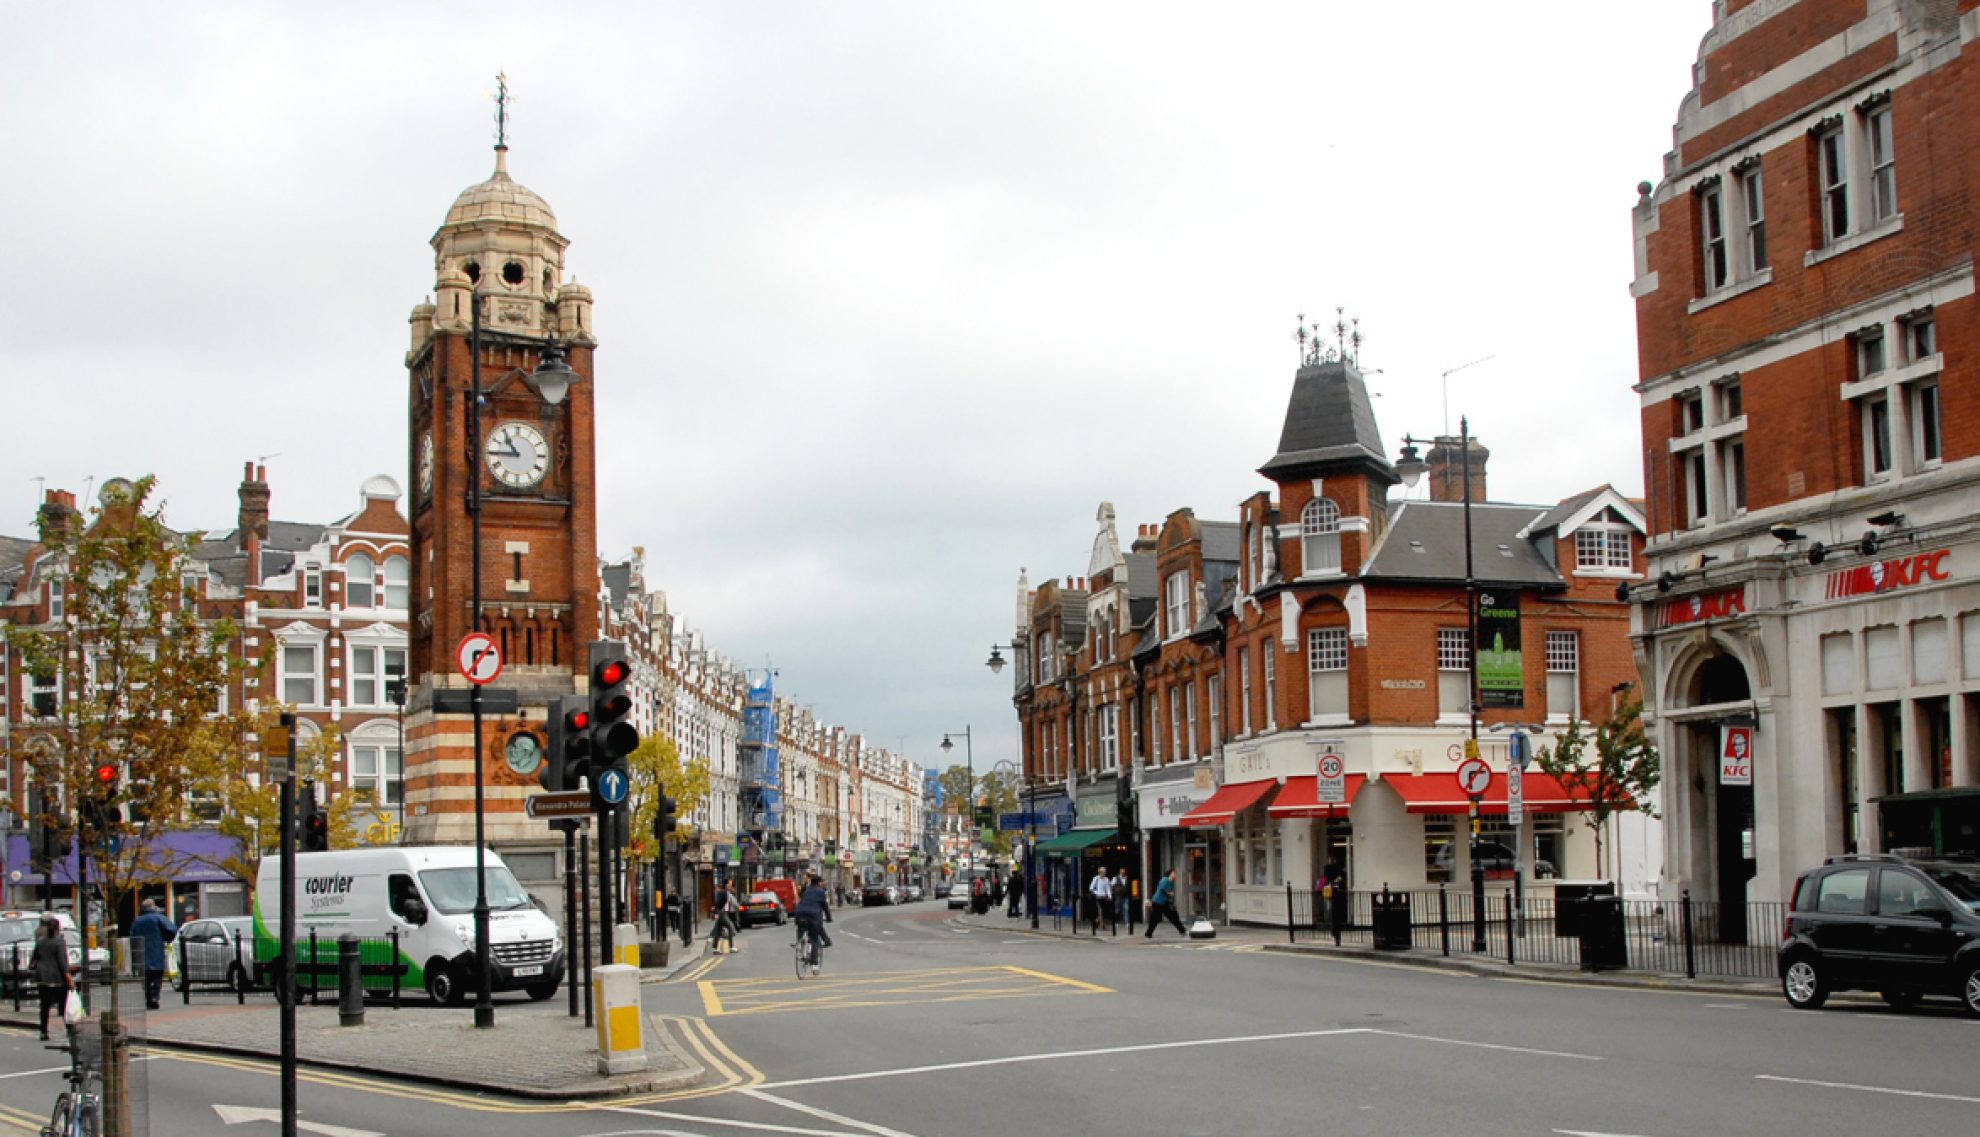 Crouch End high street in the N8 London postcode